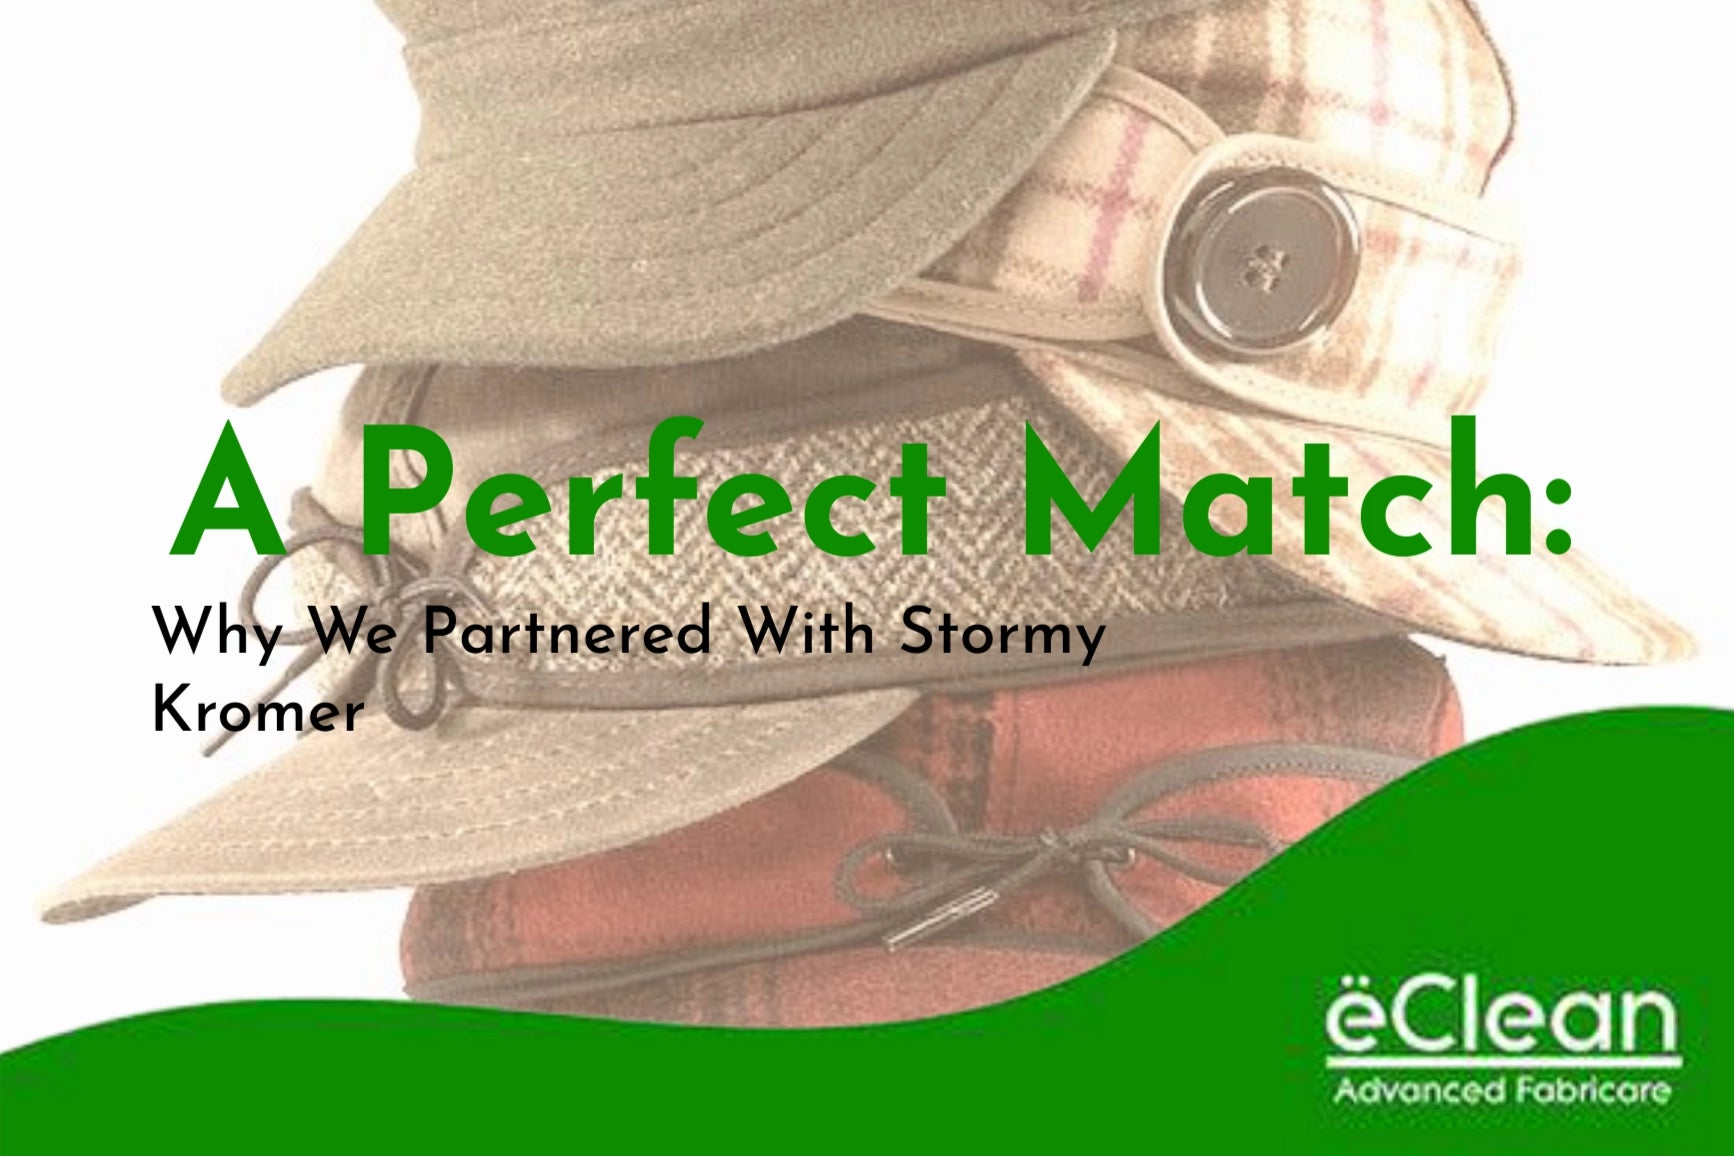 A Perfect Match: Why We Partnered With Stormy Kromer